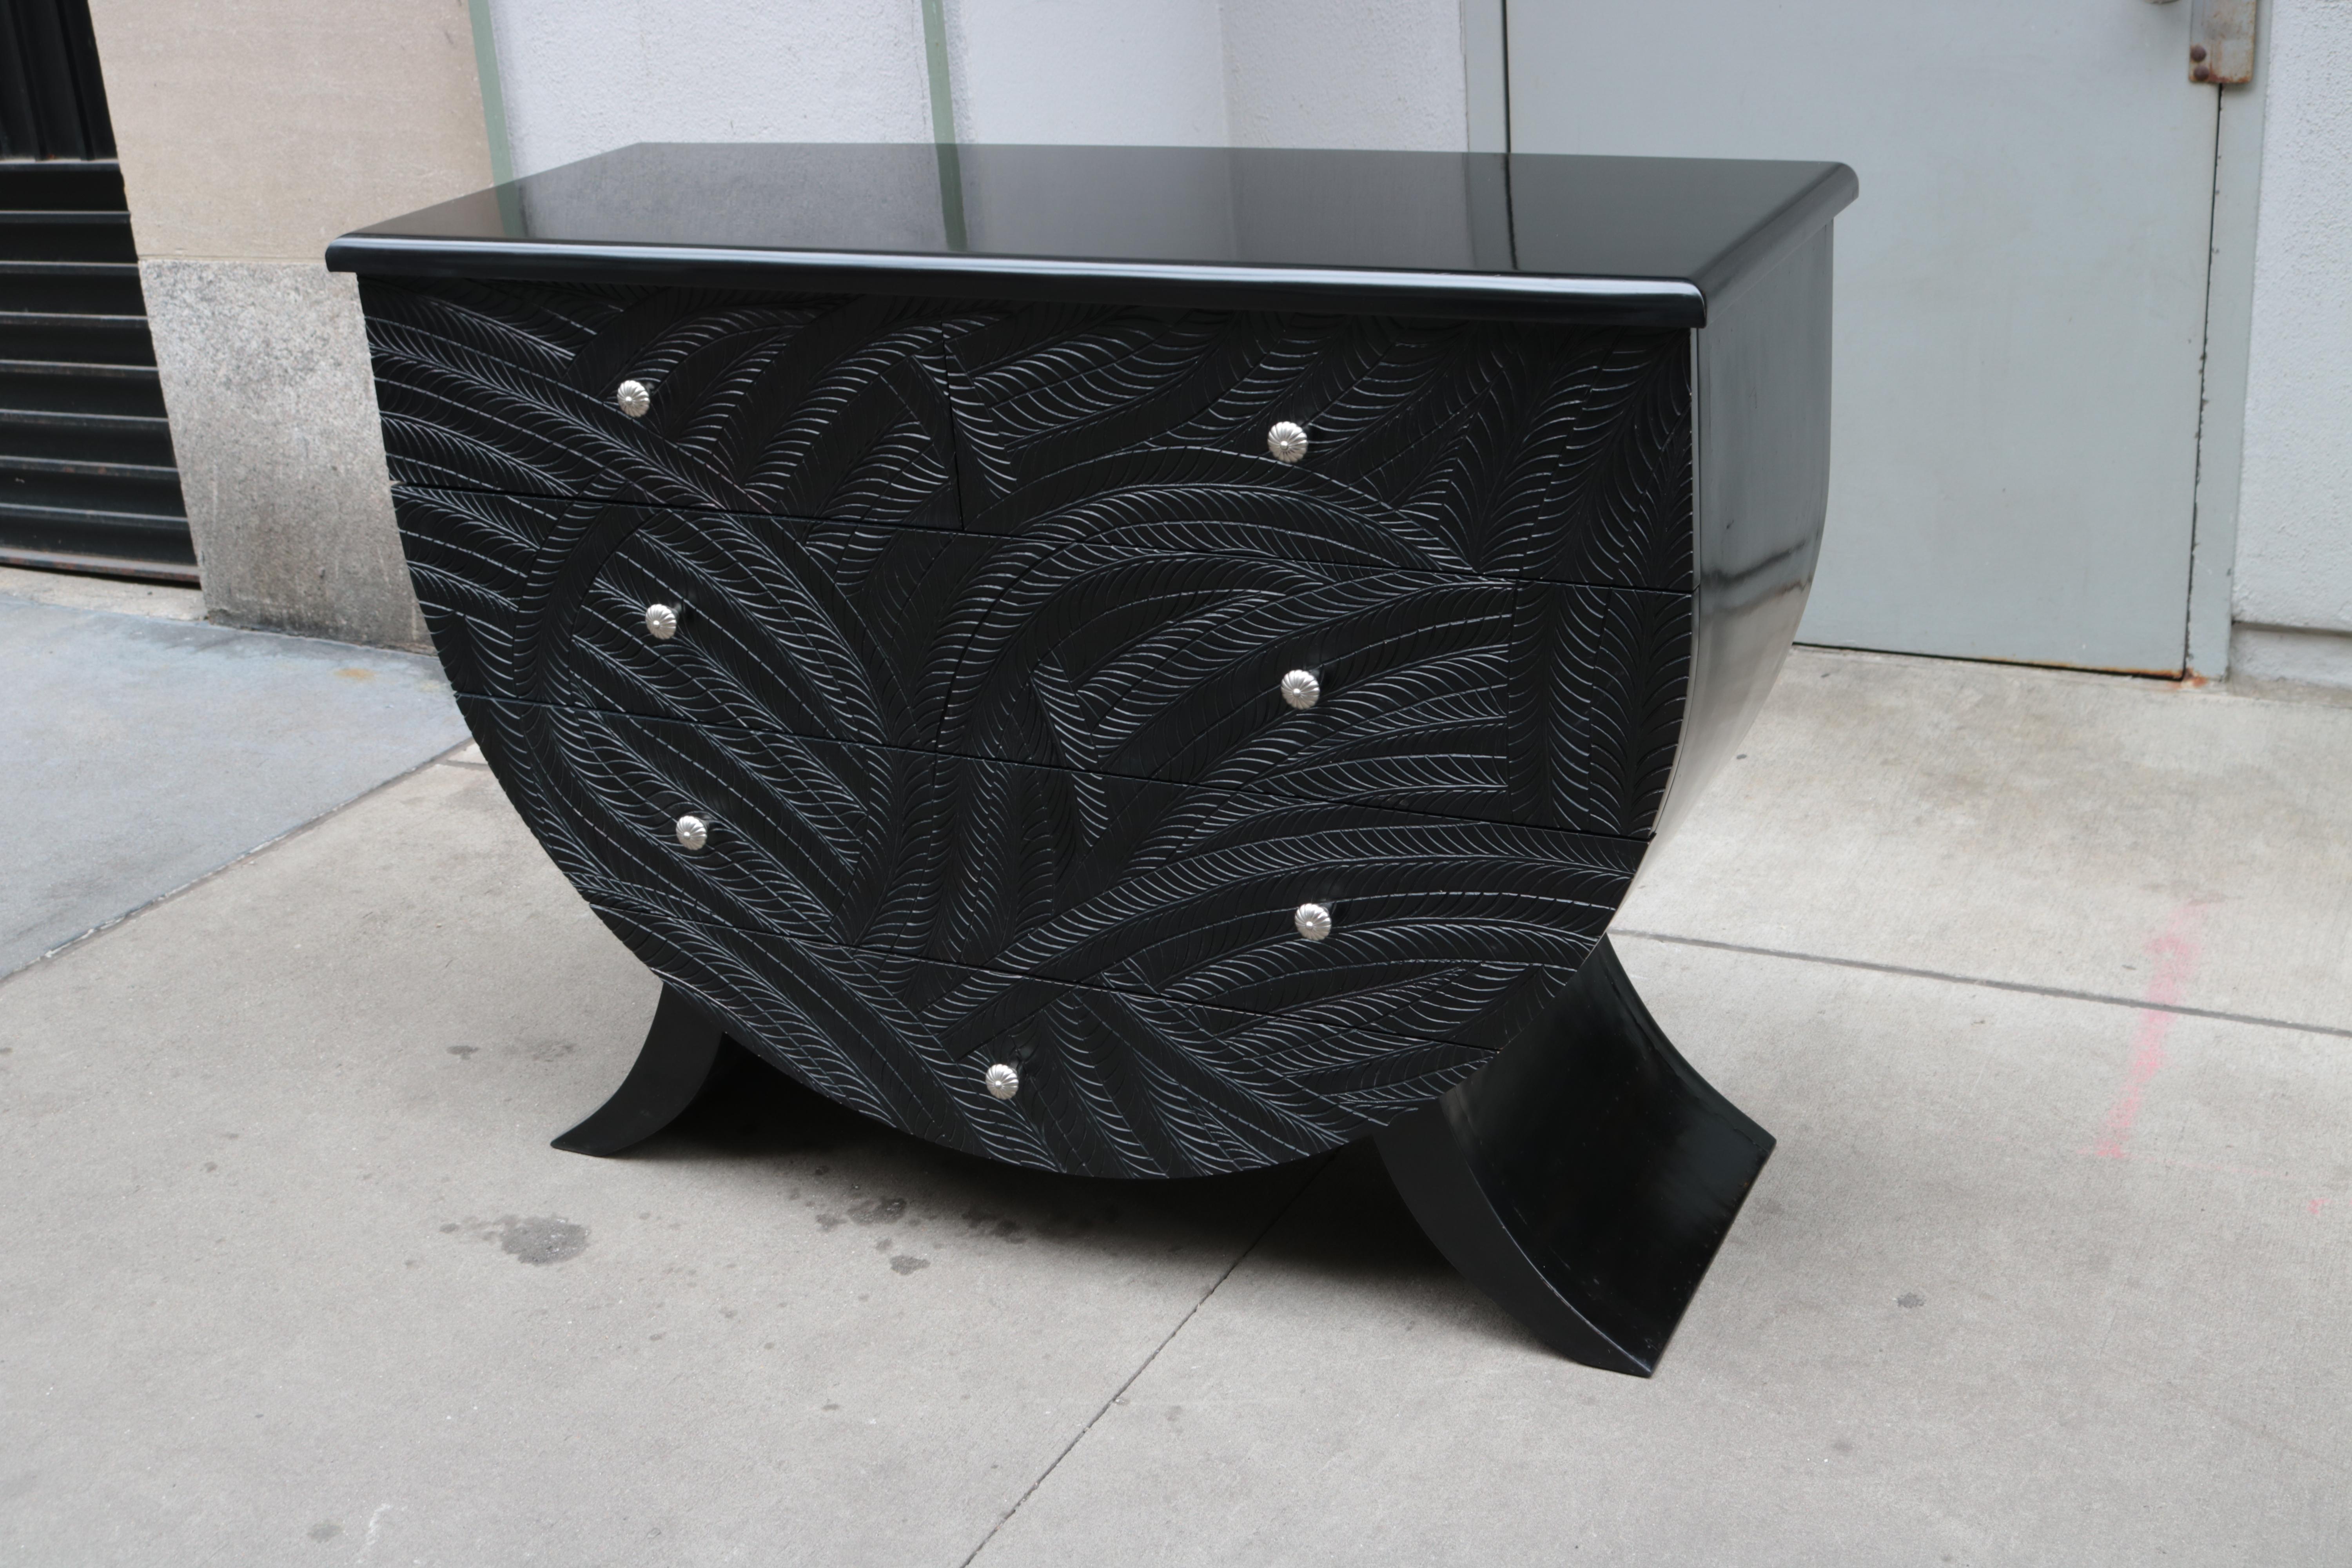 An ebonized Italian Modernist chest of drawers.
Ebonized wood with highly detailed carvings 
on the drawer fronts and nickeled pulls.